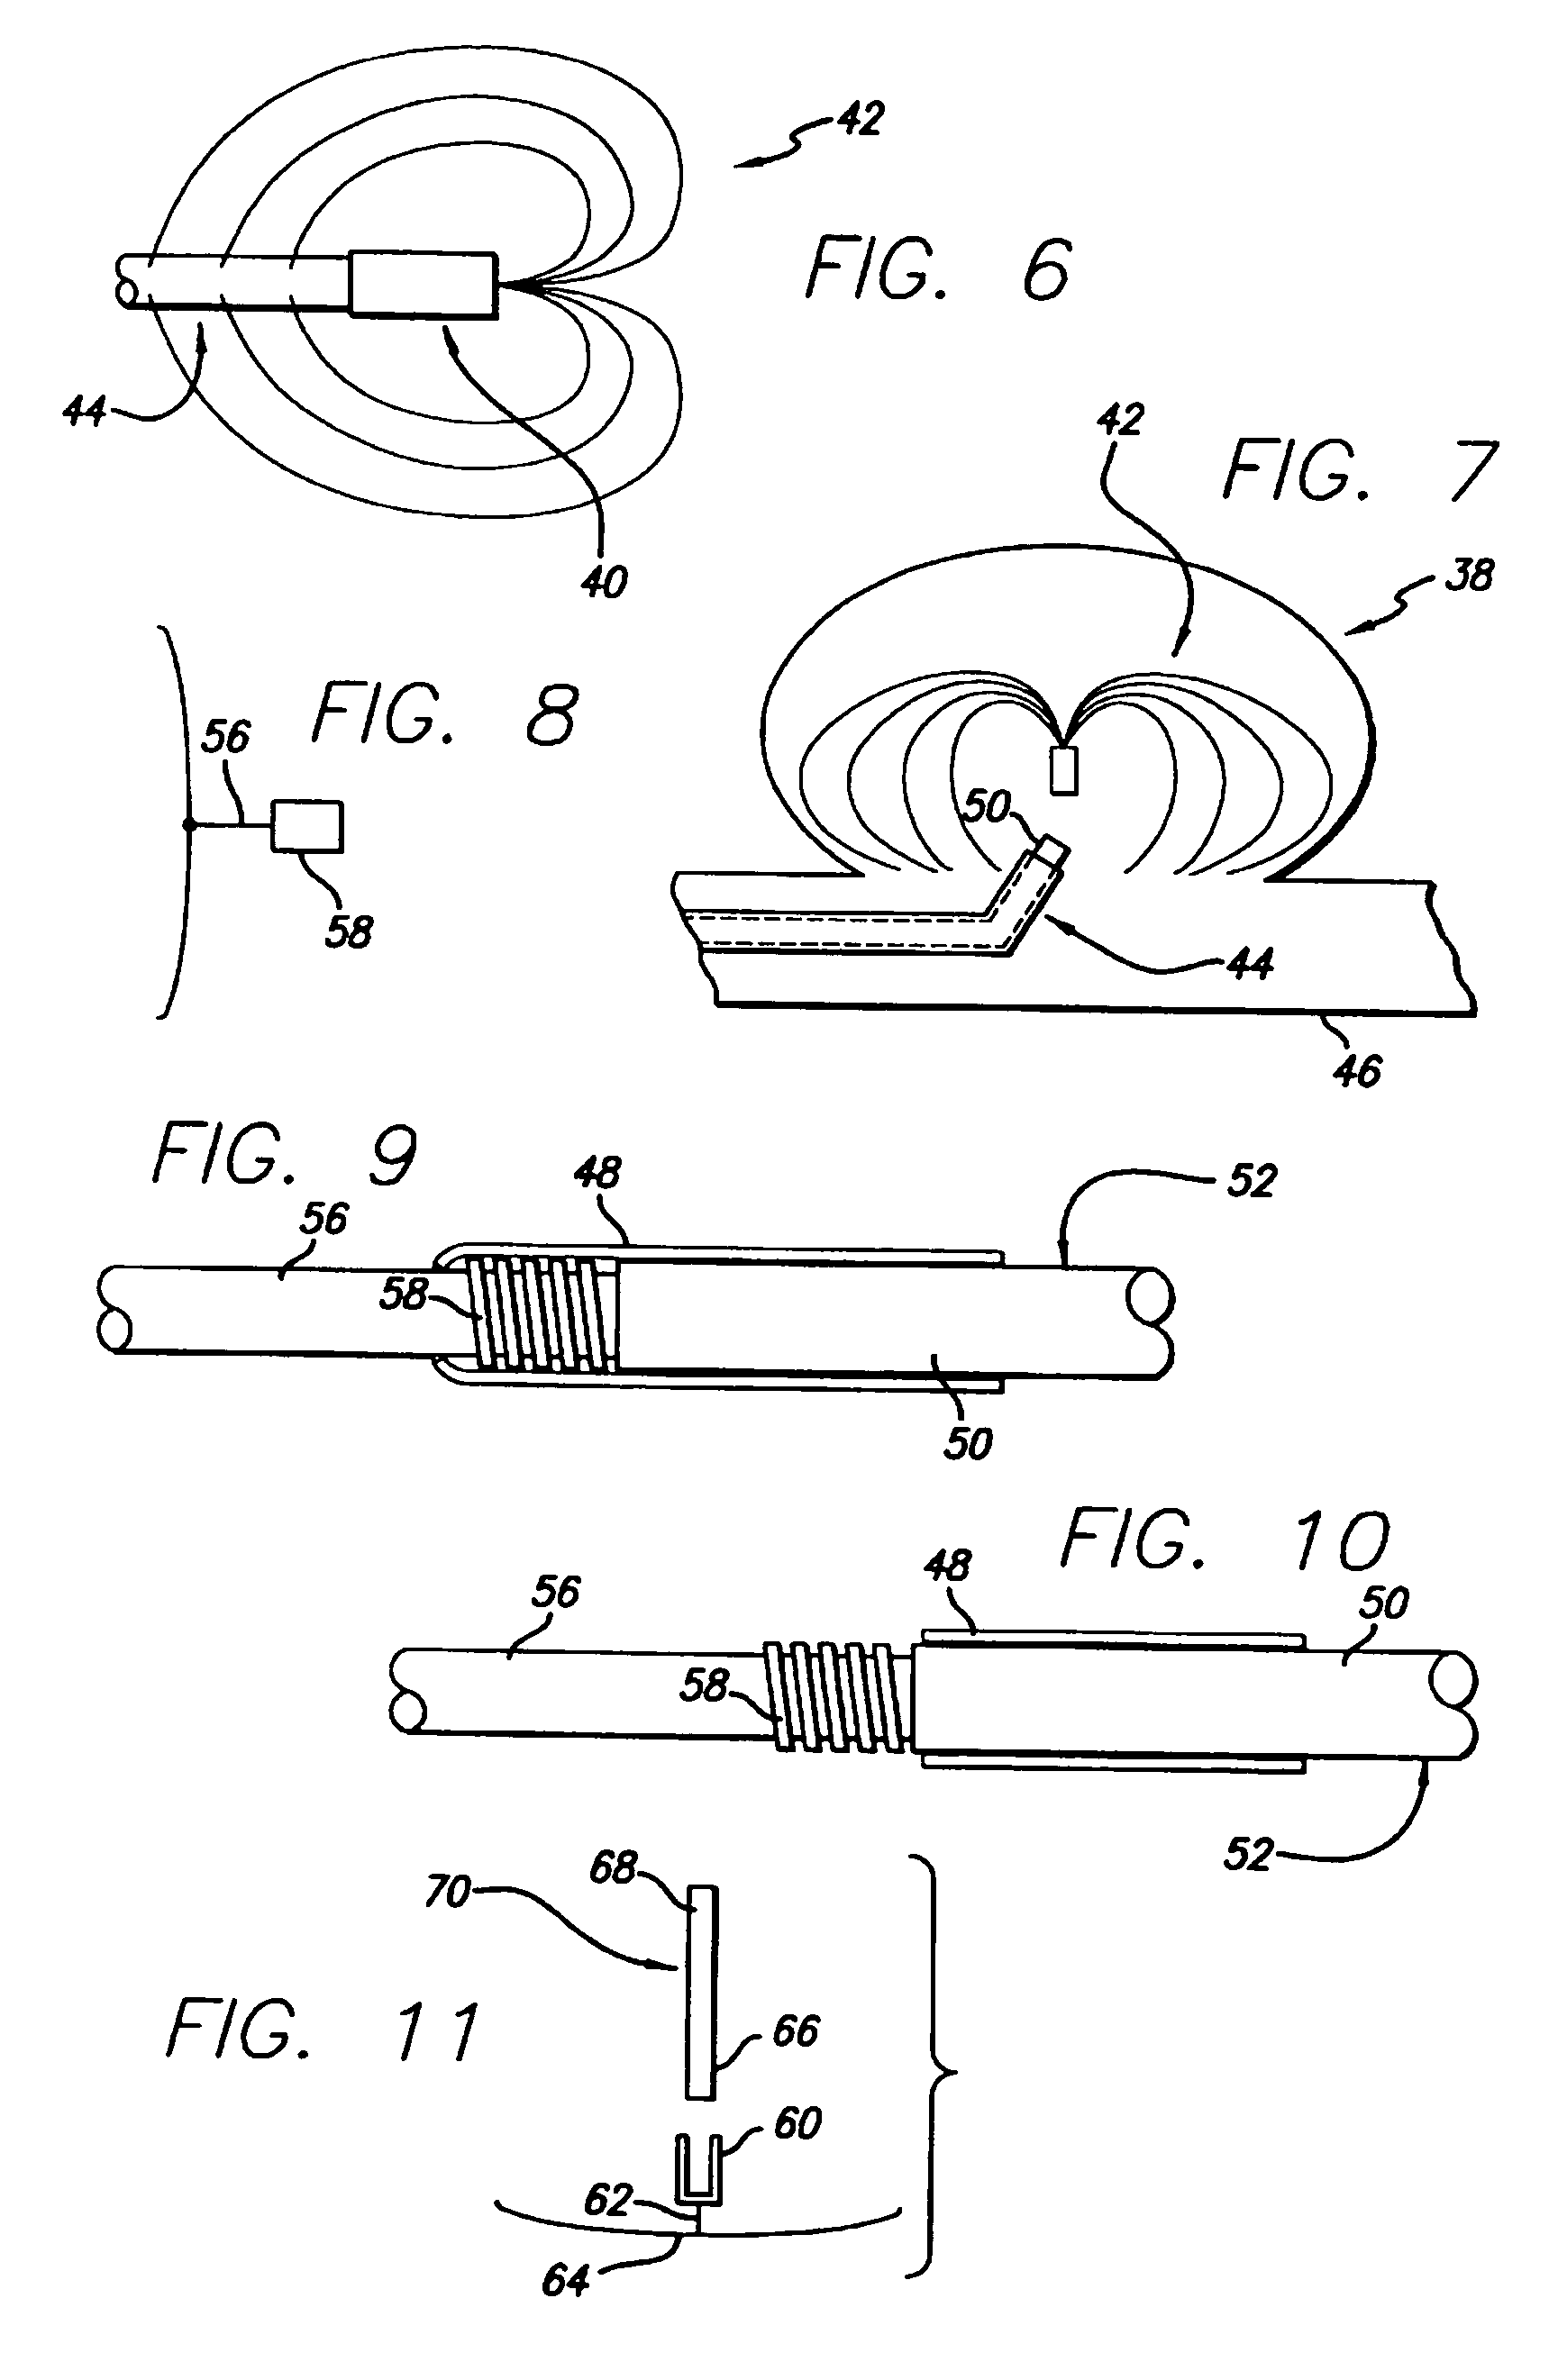 Expandable curvilinear strut arrangement for deployment with a catheter to repair an aneurysm